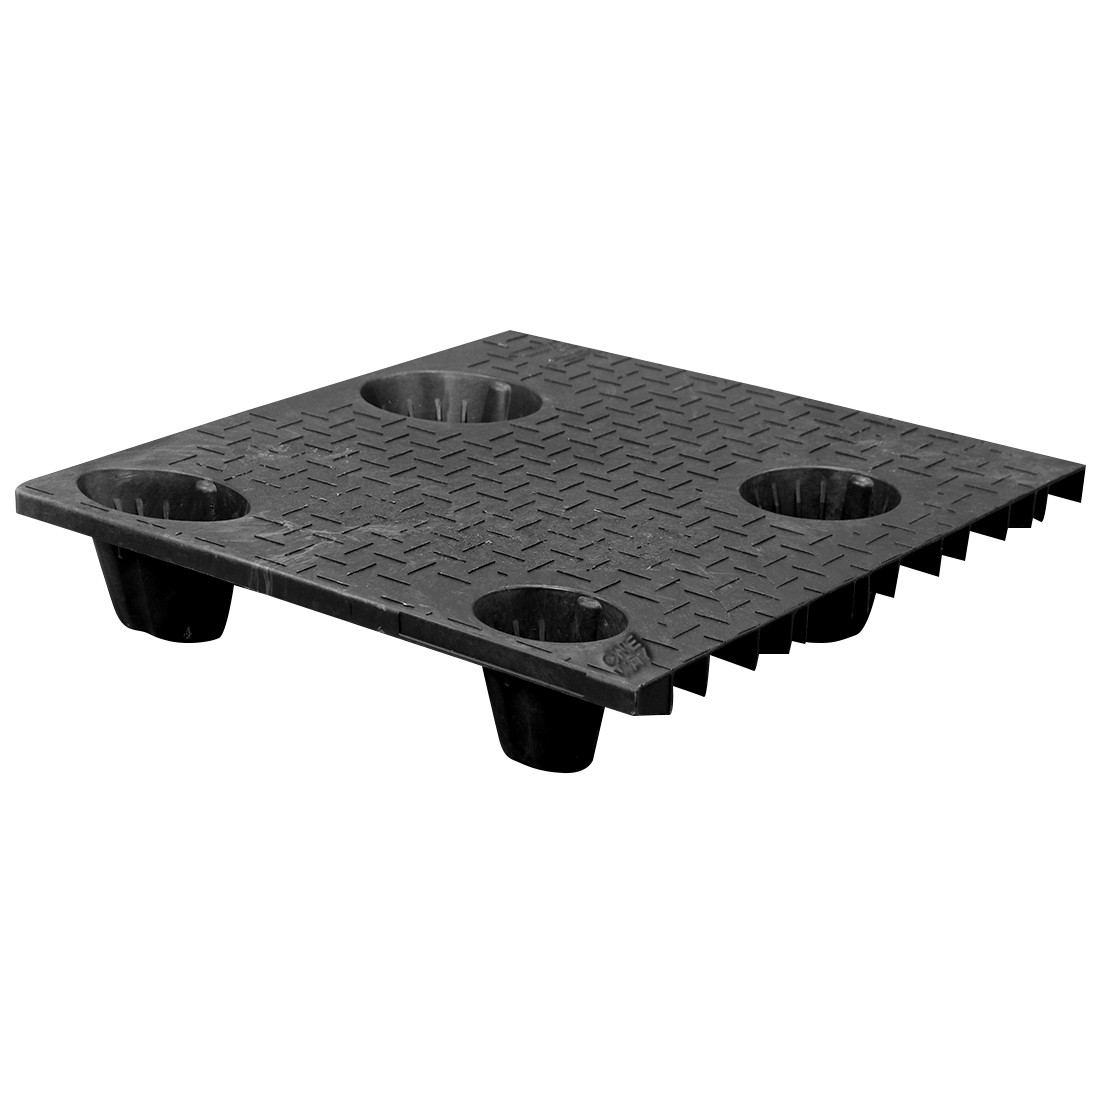 30 x 30 Nestable Solid Deck Plastic Pallet | One Way Solutions # PP-S ...